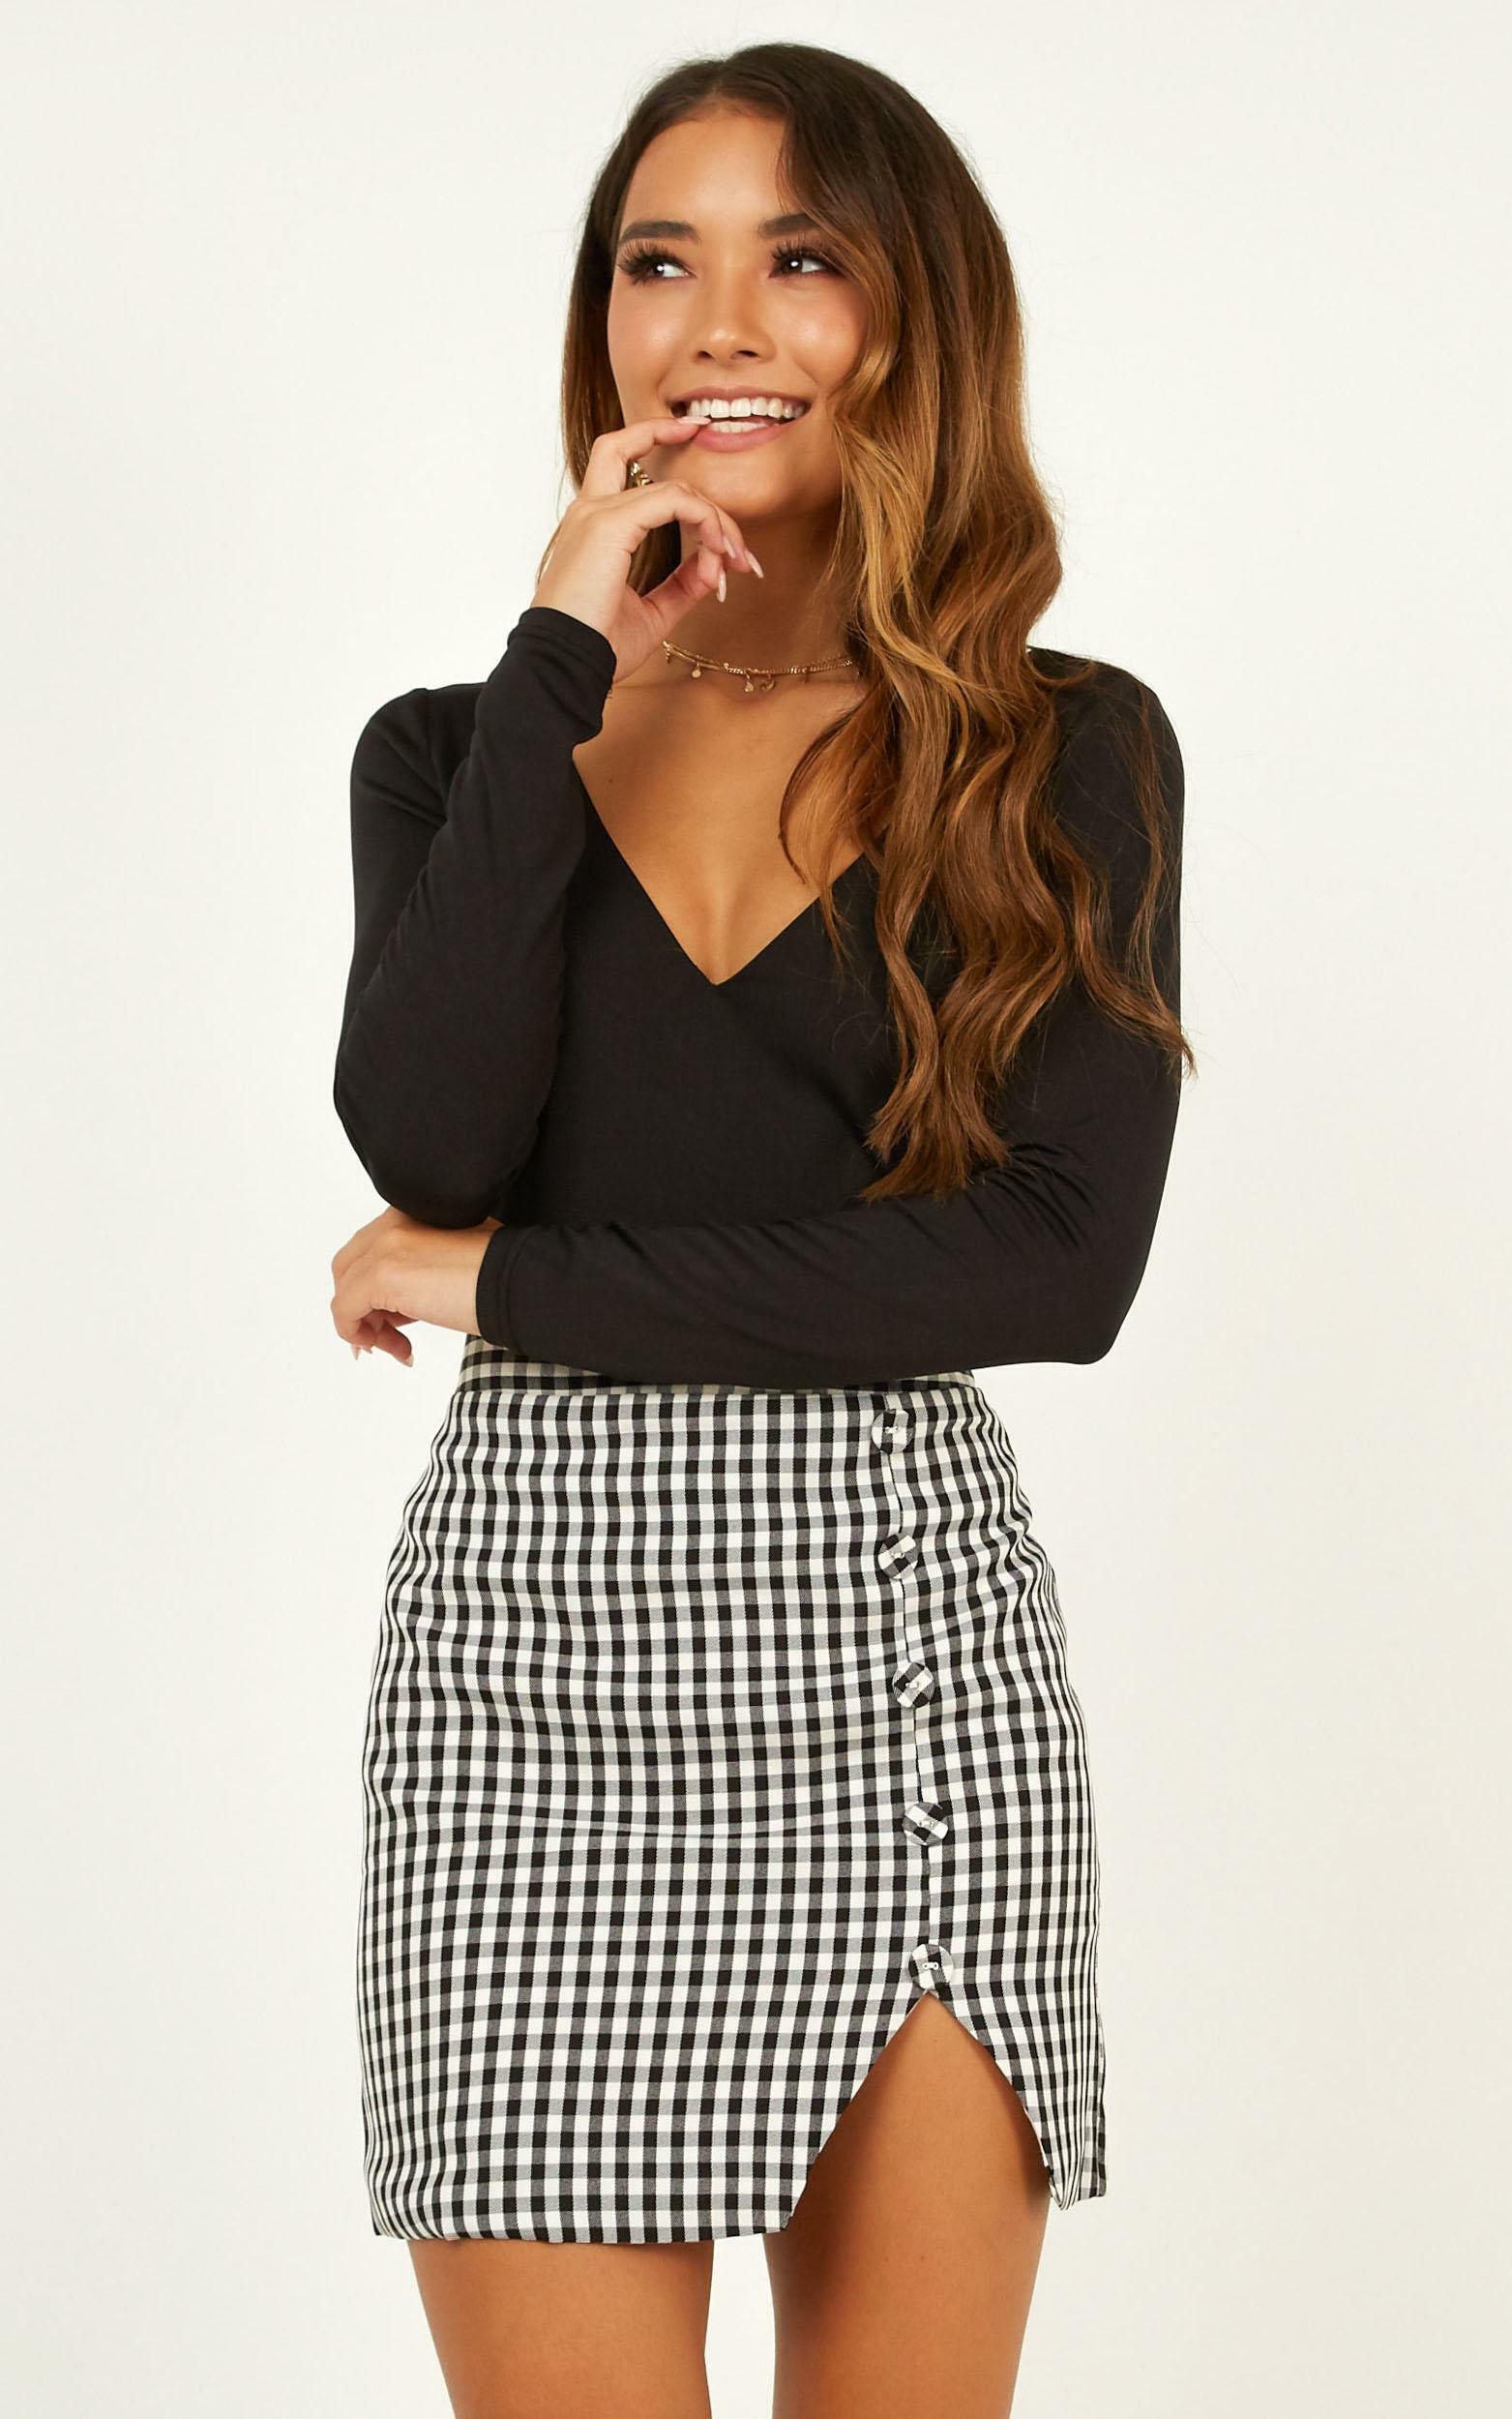 Cancelled Plans Skirt In Black Check - 6 (XS), Black, hi-res image number null